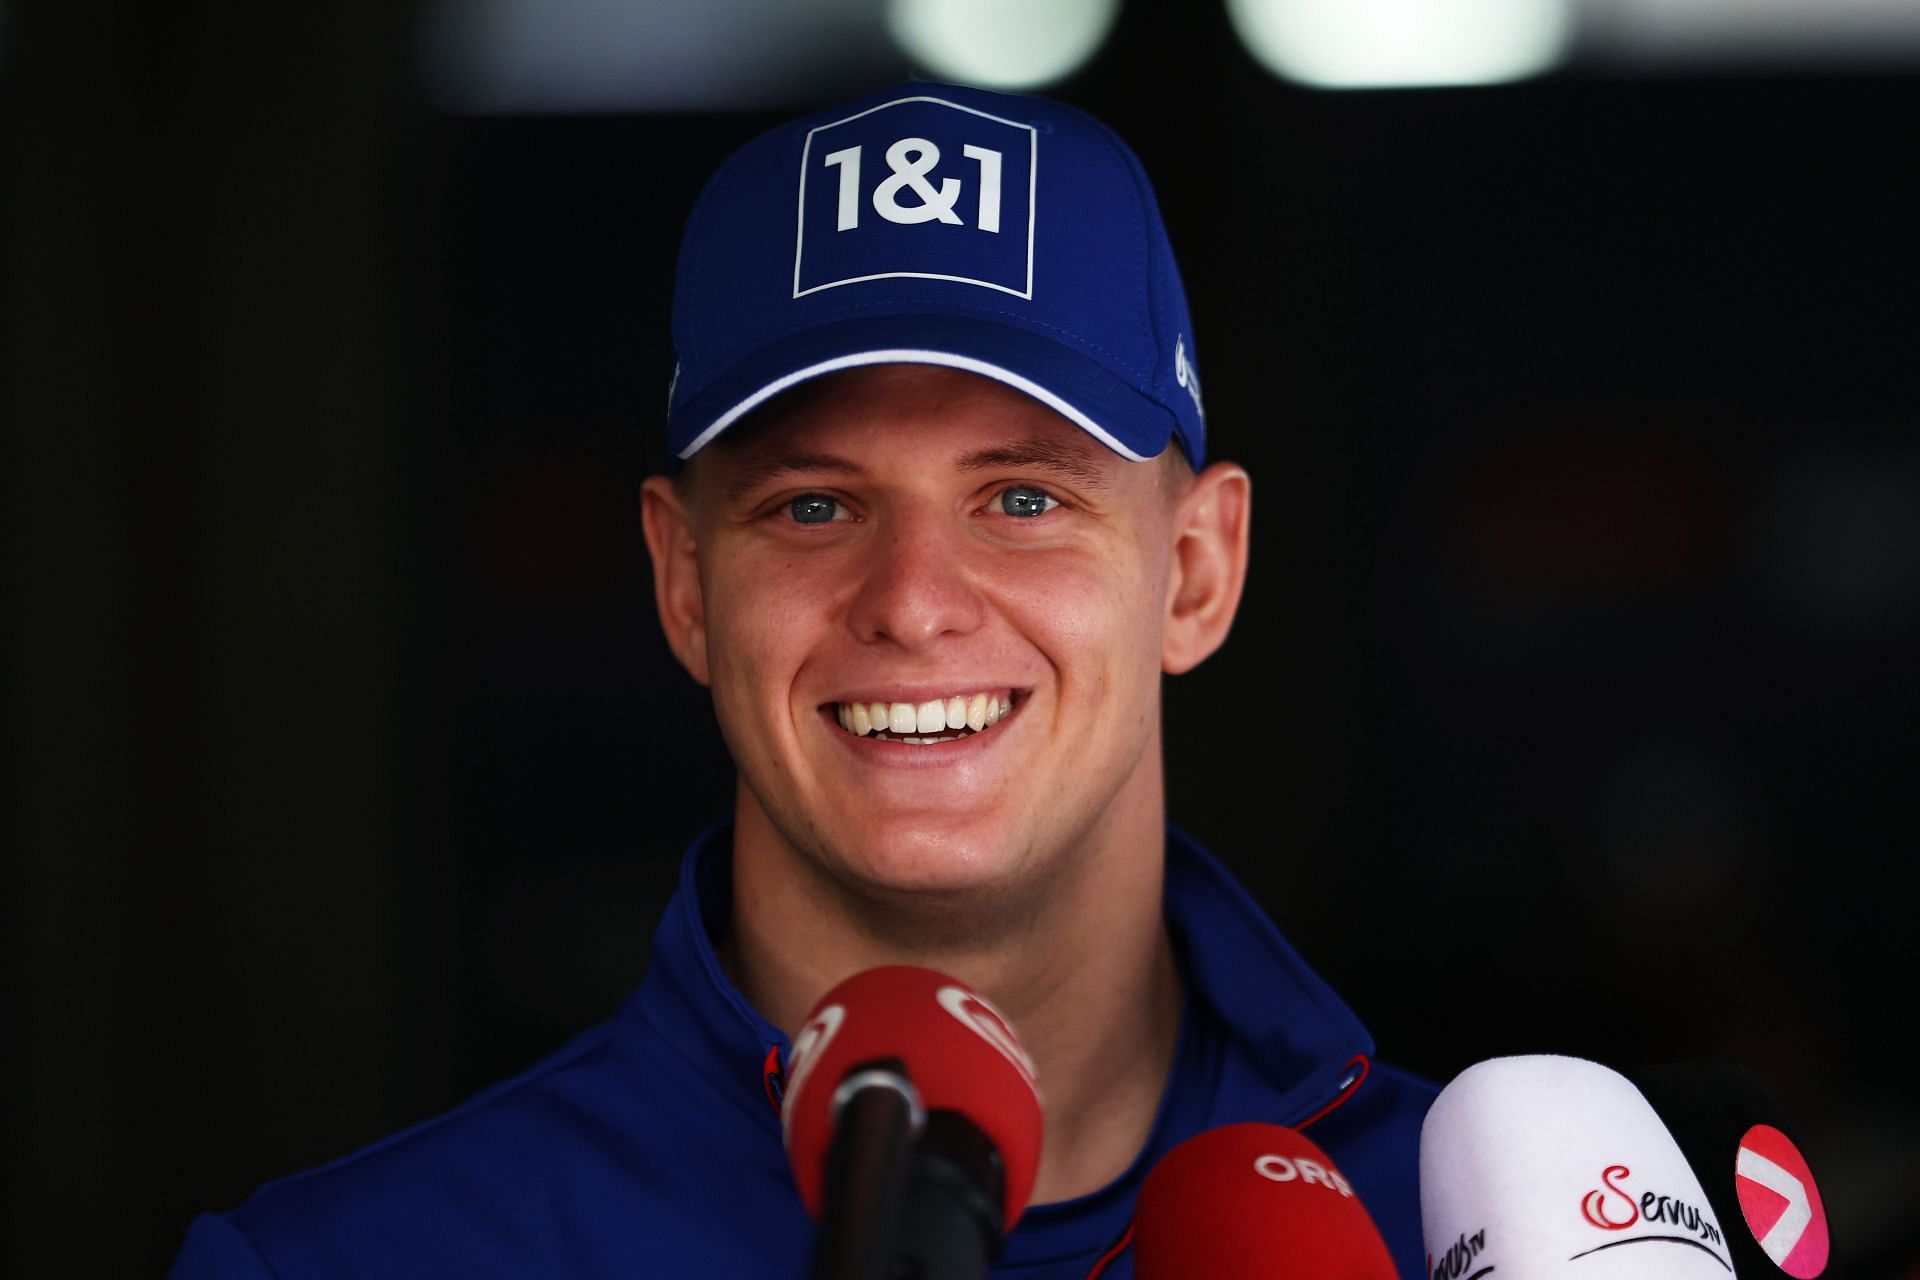 Mick Schumacher of Germany and Haas F1 talks to the media in the Paddock during previews ahead of the F1 Grand Prix of Austria at Red Bull Ring on July 07, 2022 in Spielberg, Austria. (Photo by Bryn Lennon/Getty Images)